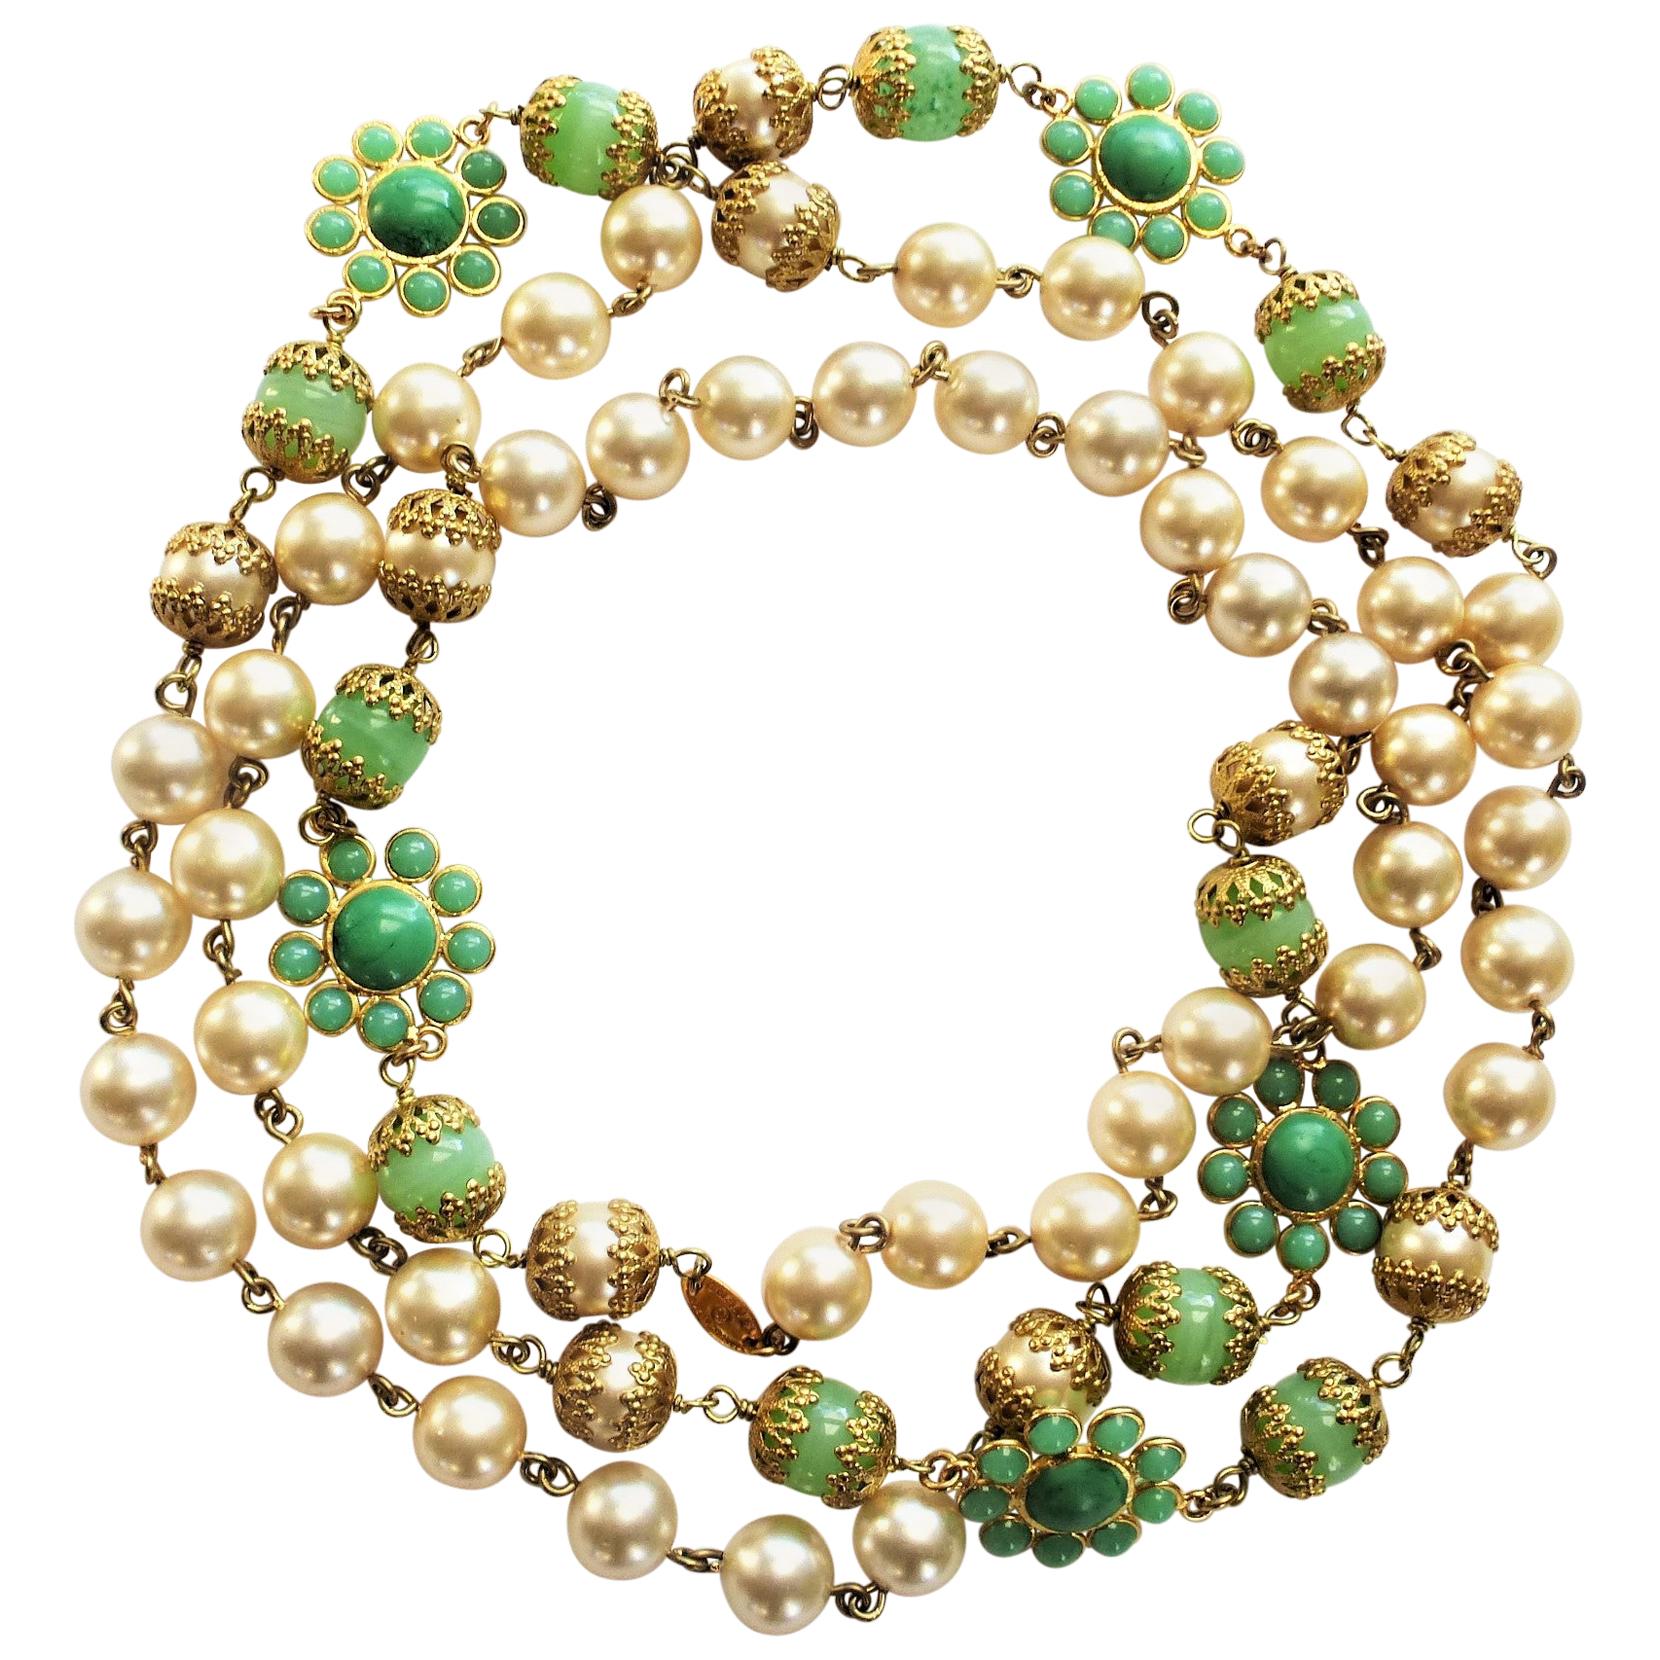 Chanel necklace with faux pearls and jade Gripoix flowers and balls sign. 1991 